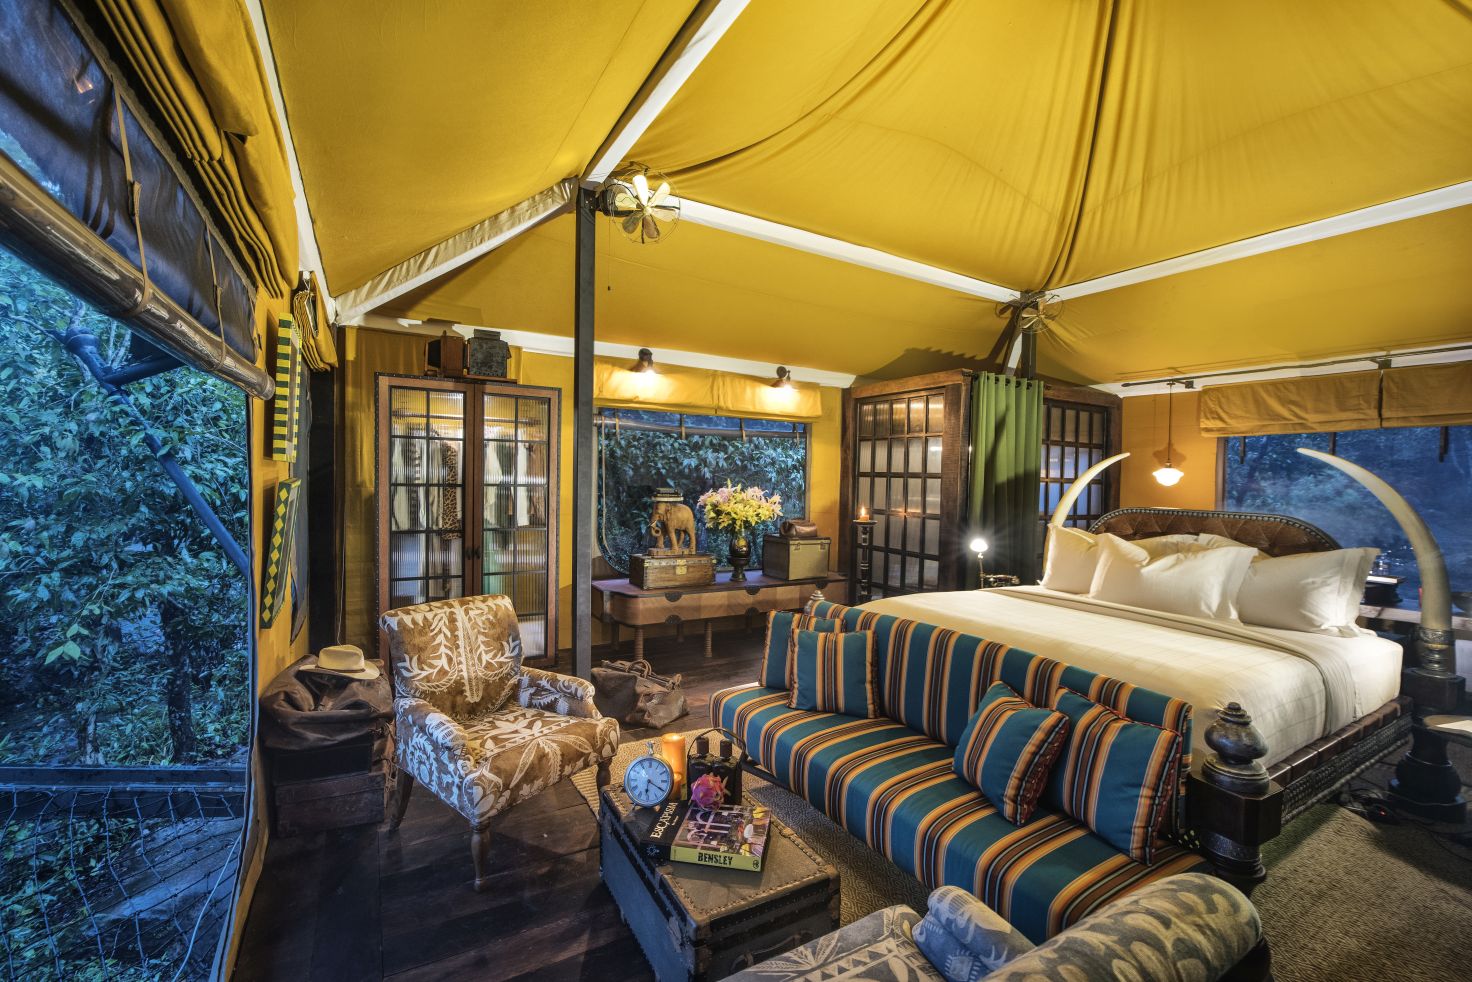 Redefining the wilds of Cambodia with a few creature comforts, Shinta Mani Wild will be a new luxury camp experience that combines world-class design, hospitality, and conservation.